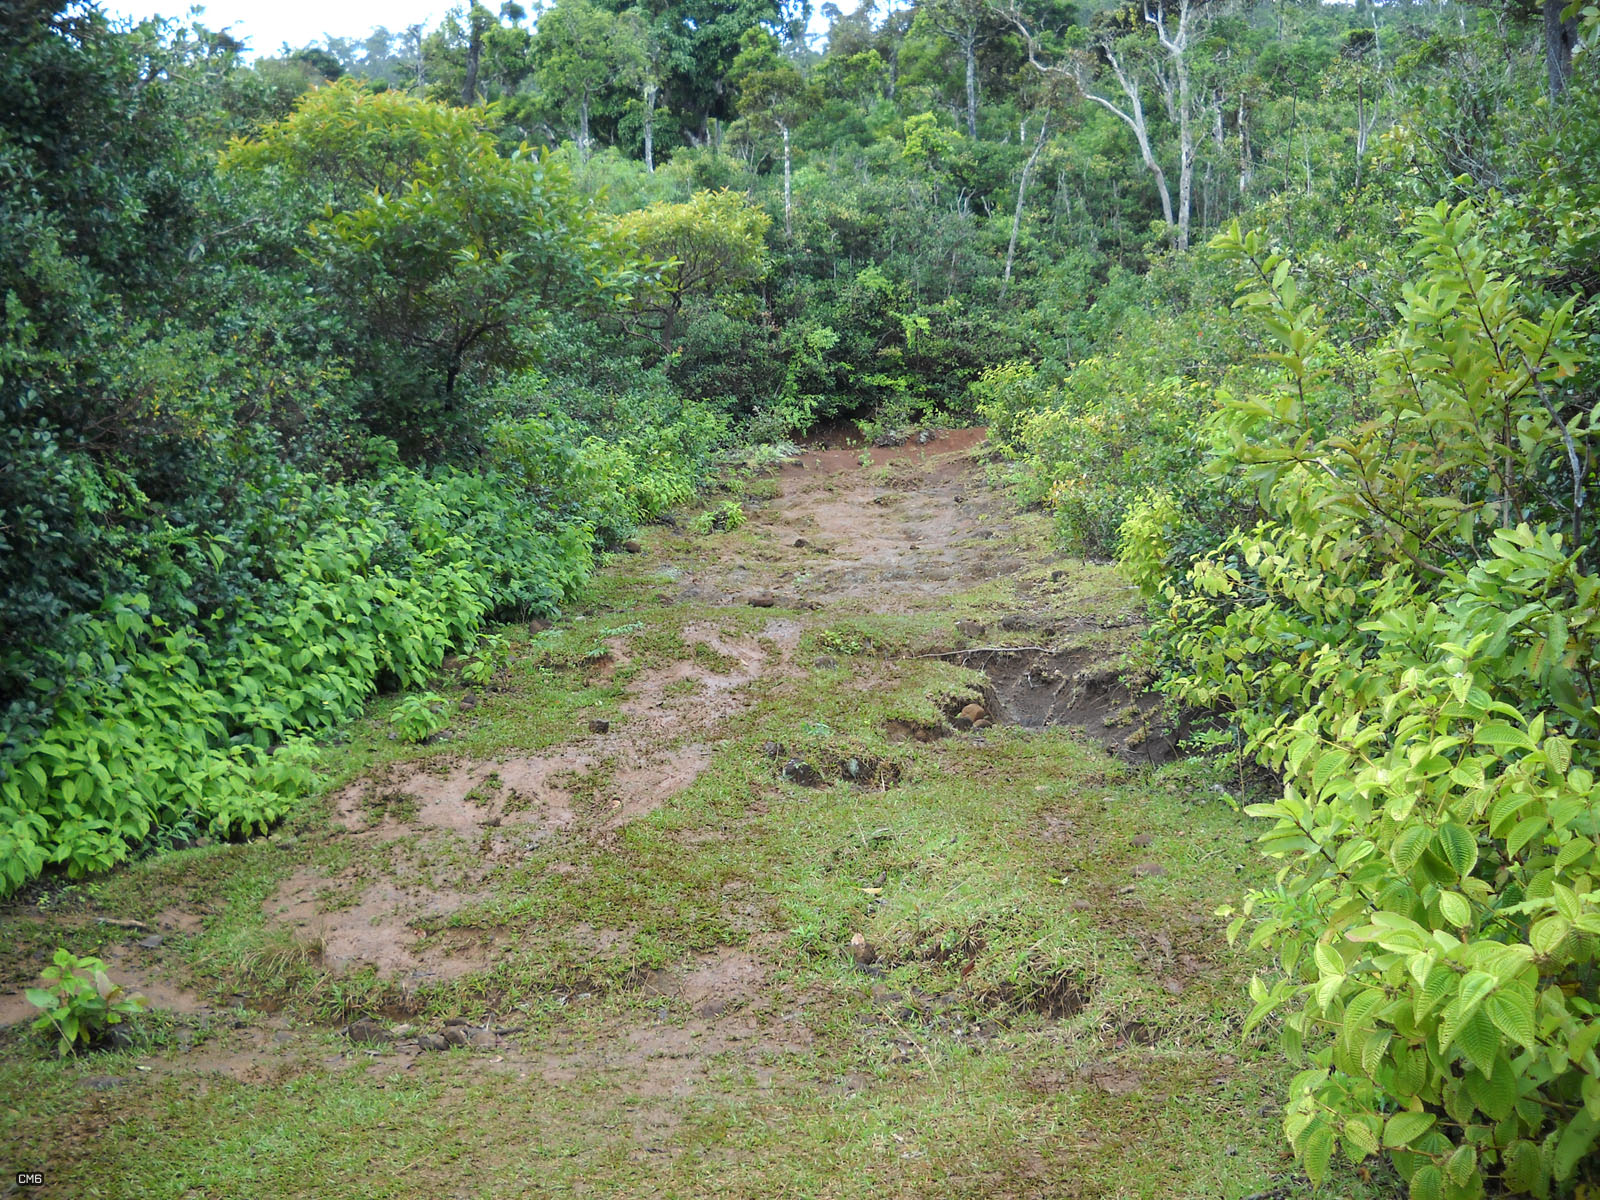 dirt trail through some thicket next to bushes